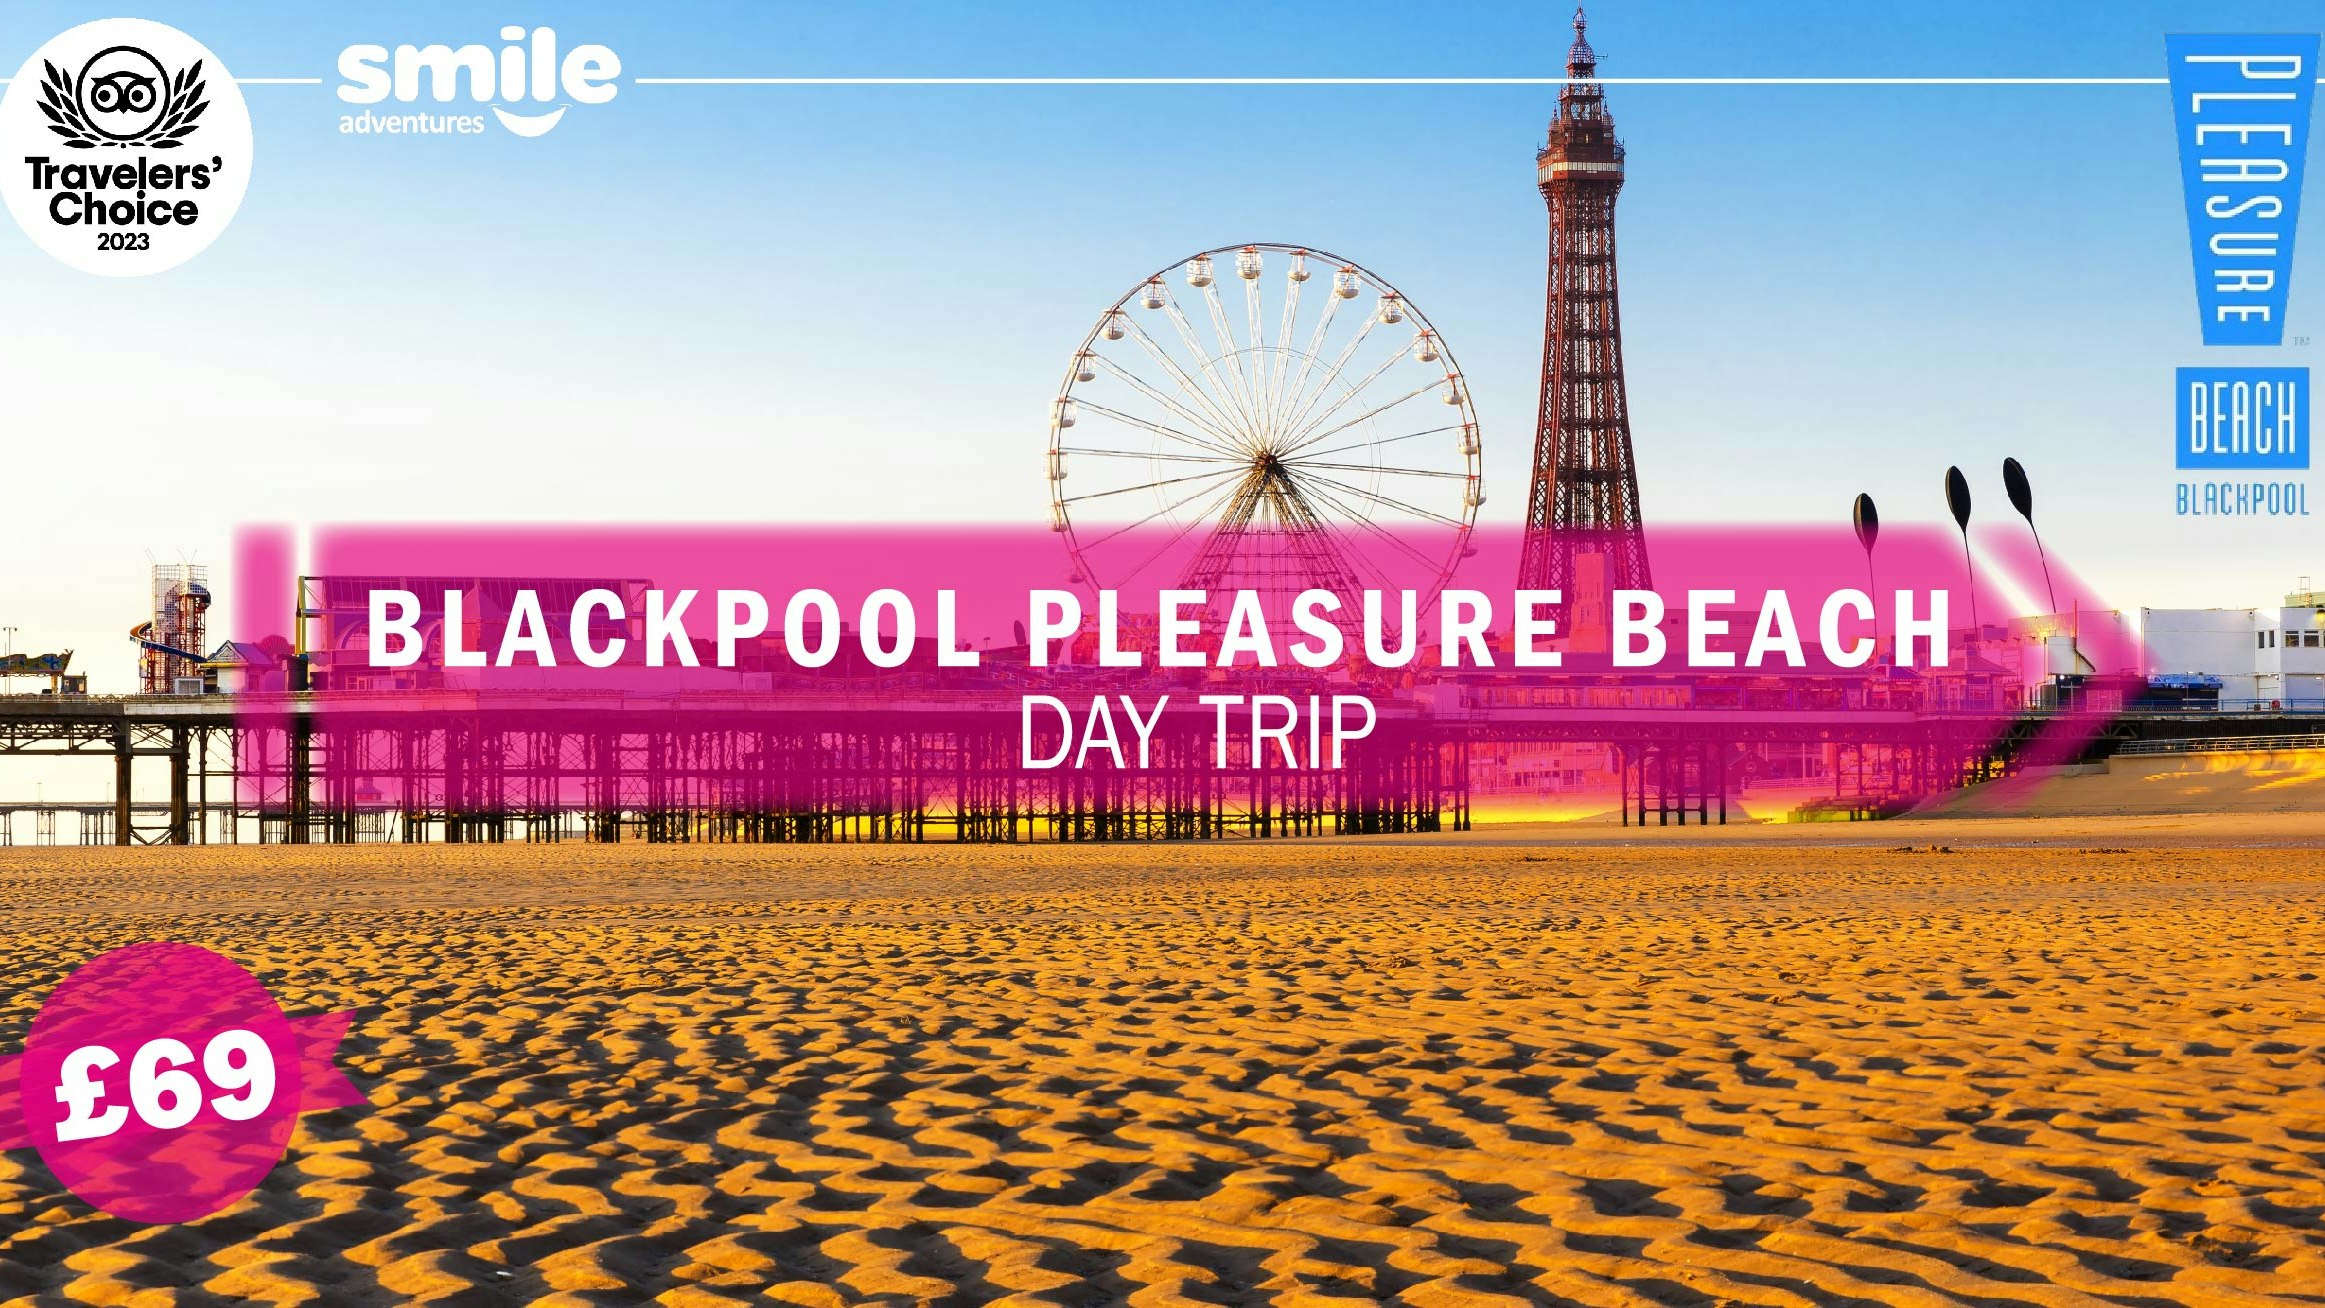 Blackpool Pleasure Beach – From Manchester